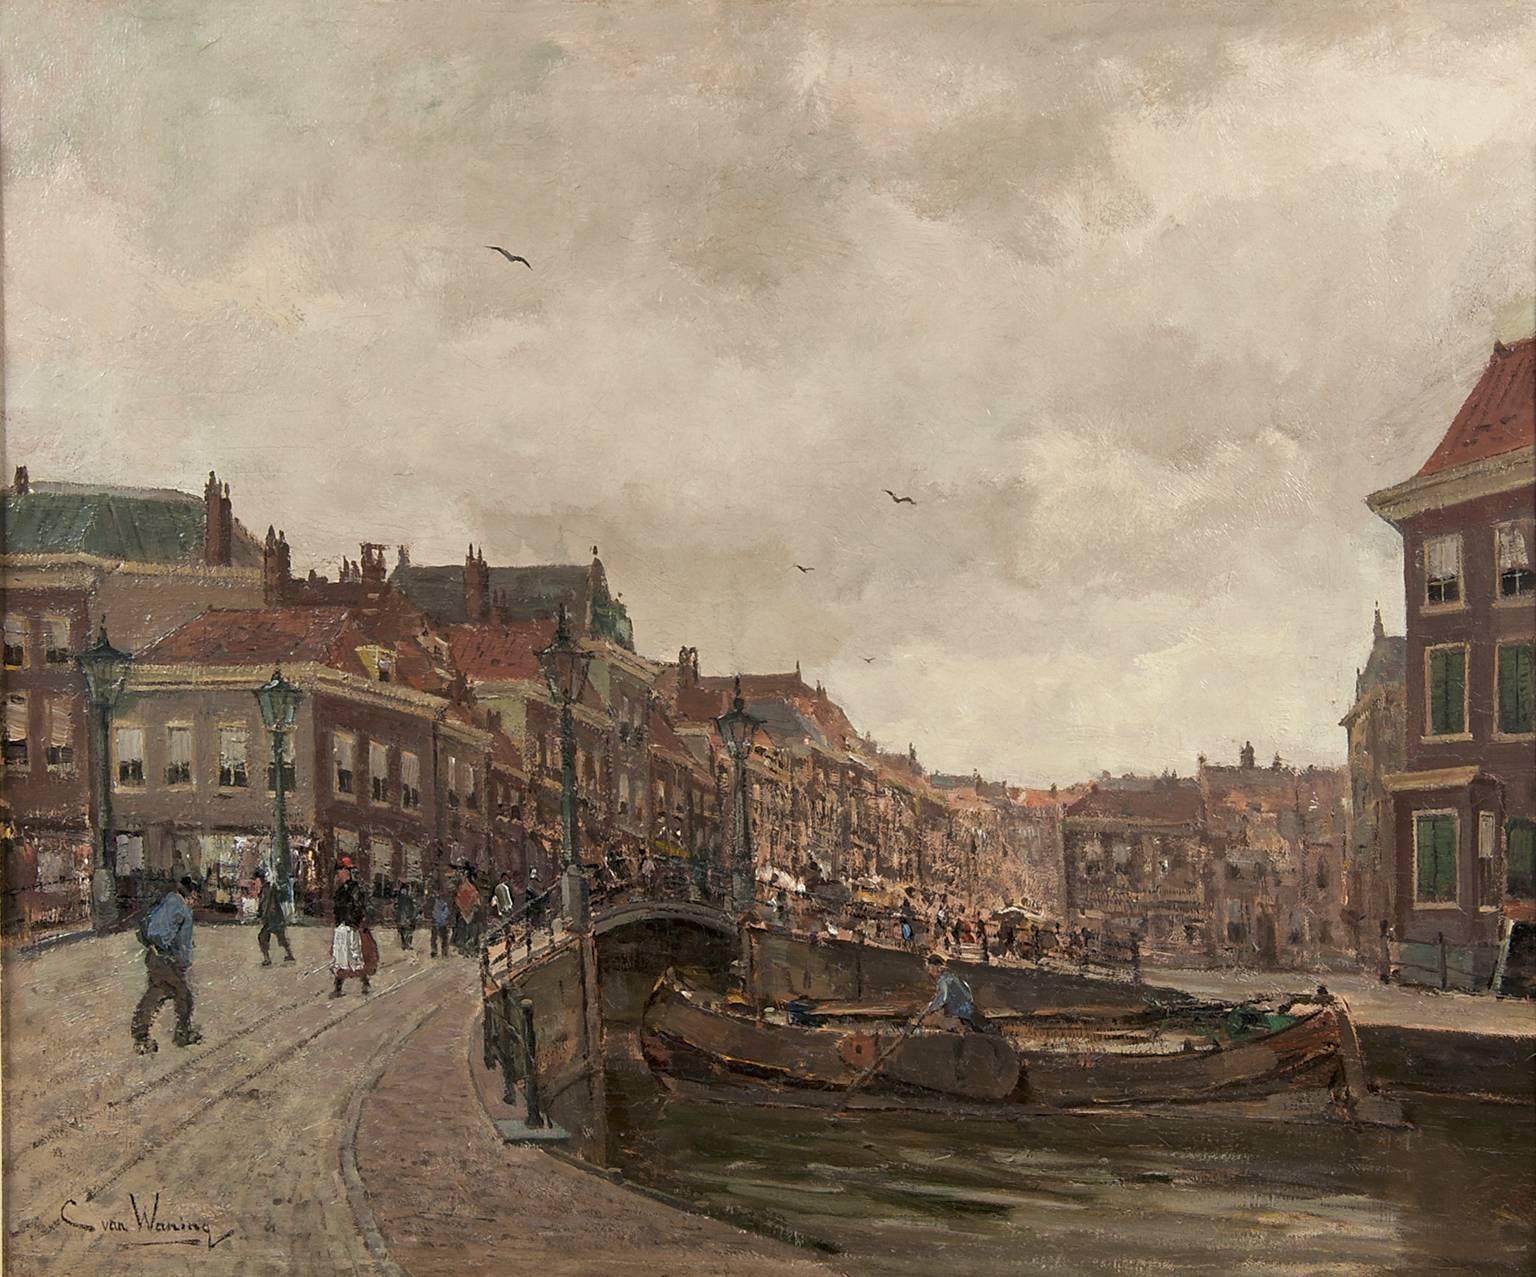 A view of the Wagenbrug and the Wagenstraat in The Hague - Painting by Kees van Waning